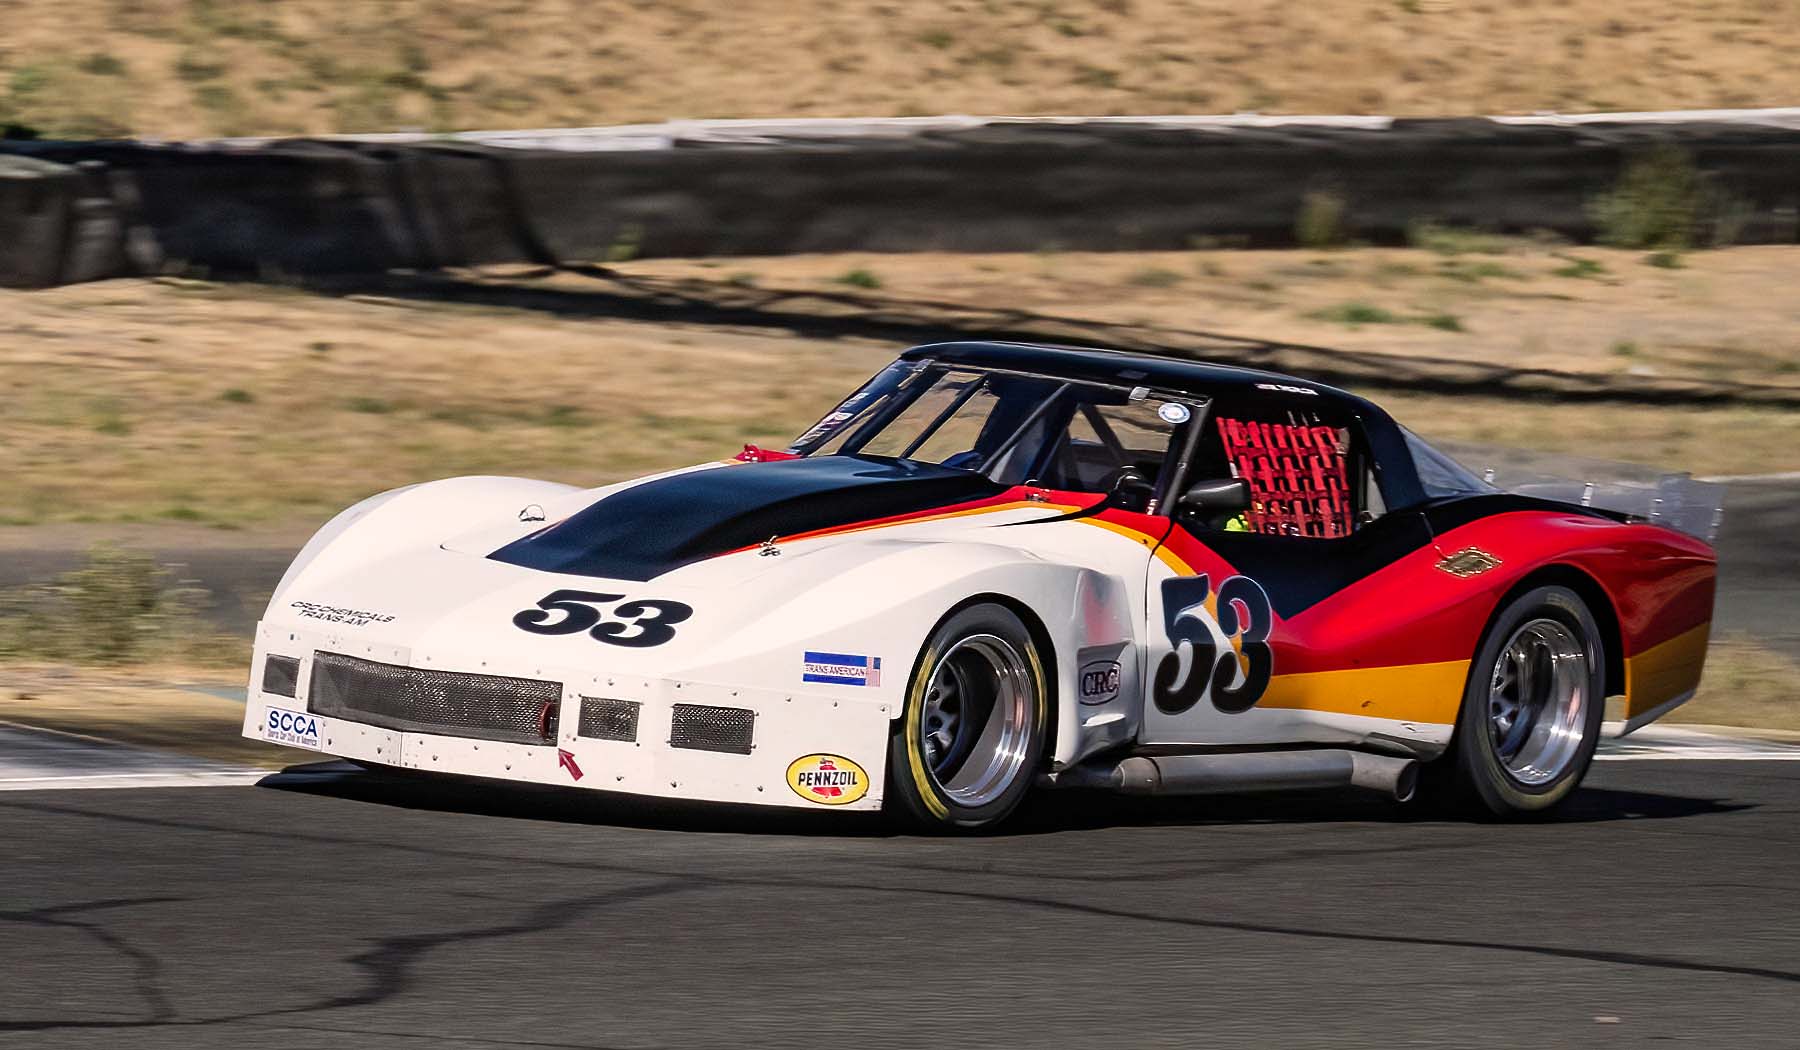 Big, mean, fast, and loud. Mike Thurlow's 1976 Wide Body Chevrolet Corvette. Dennis Gray